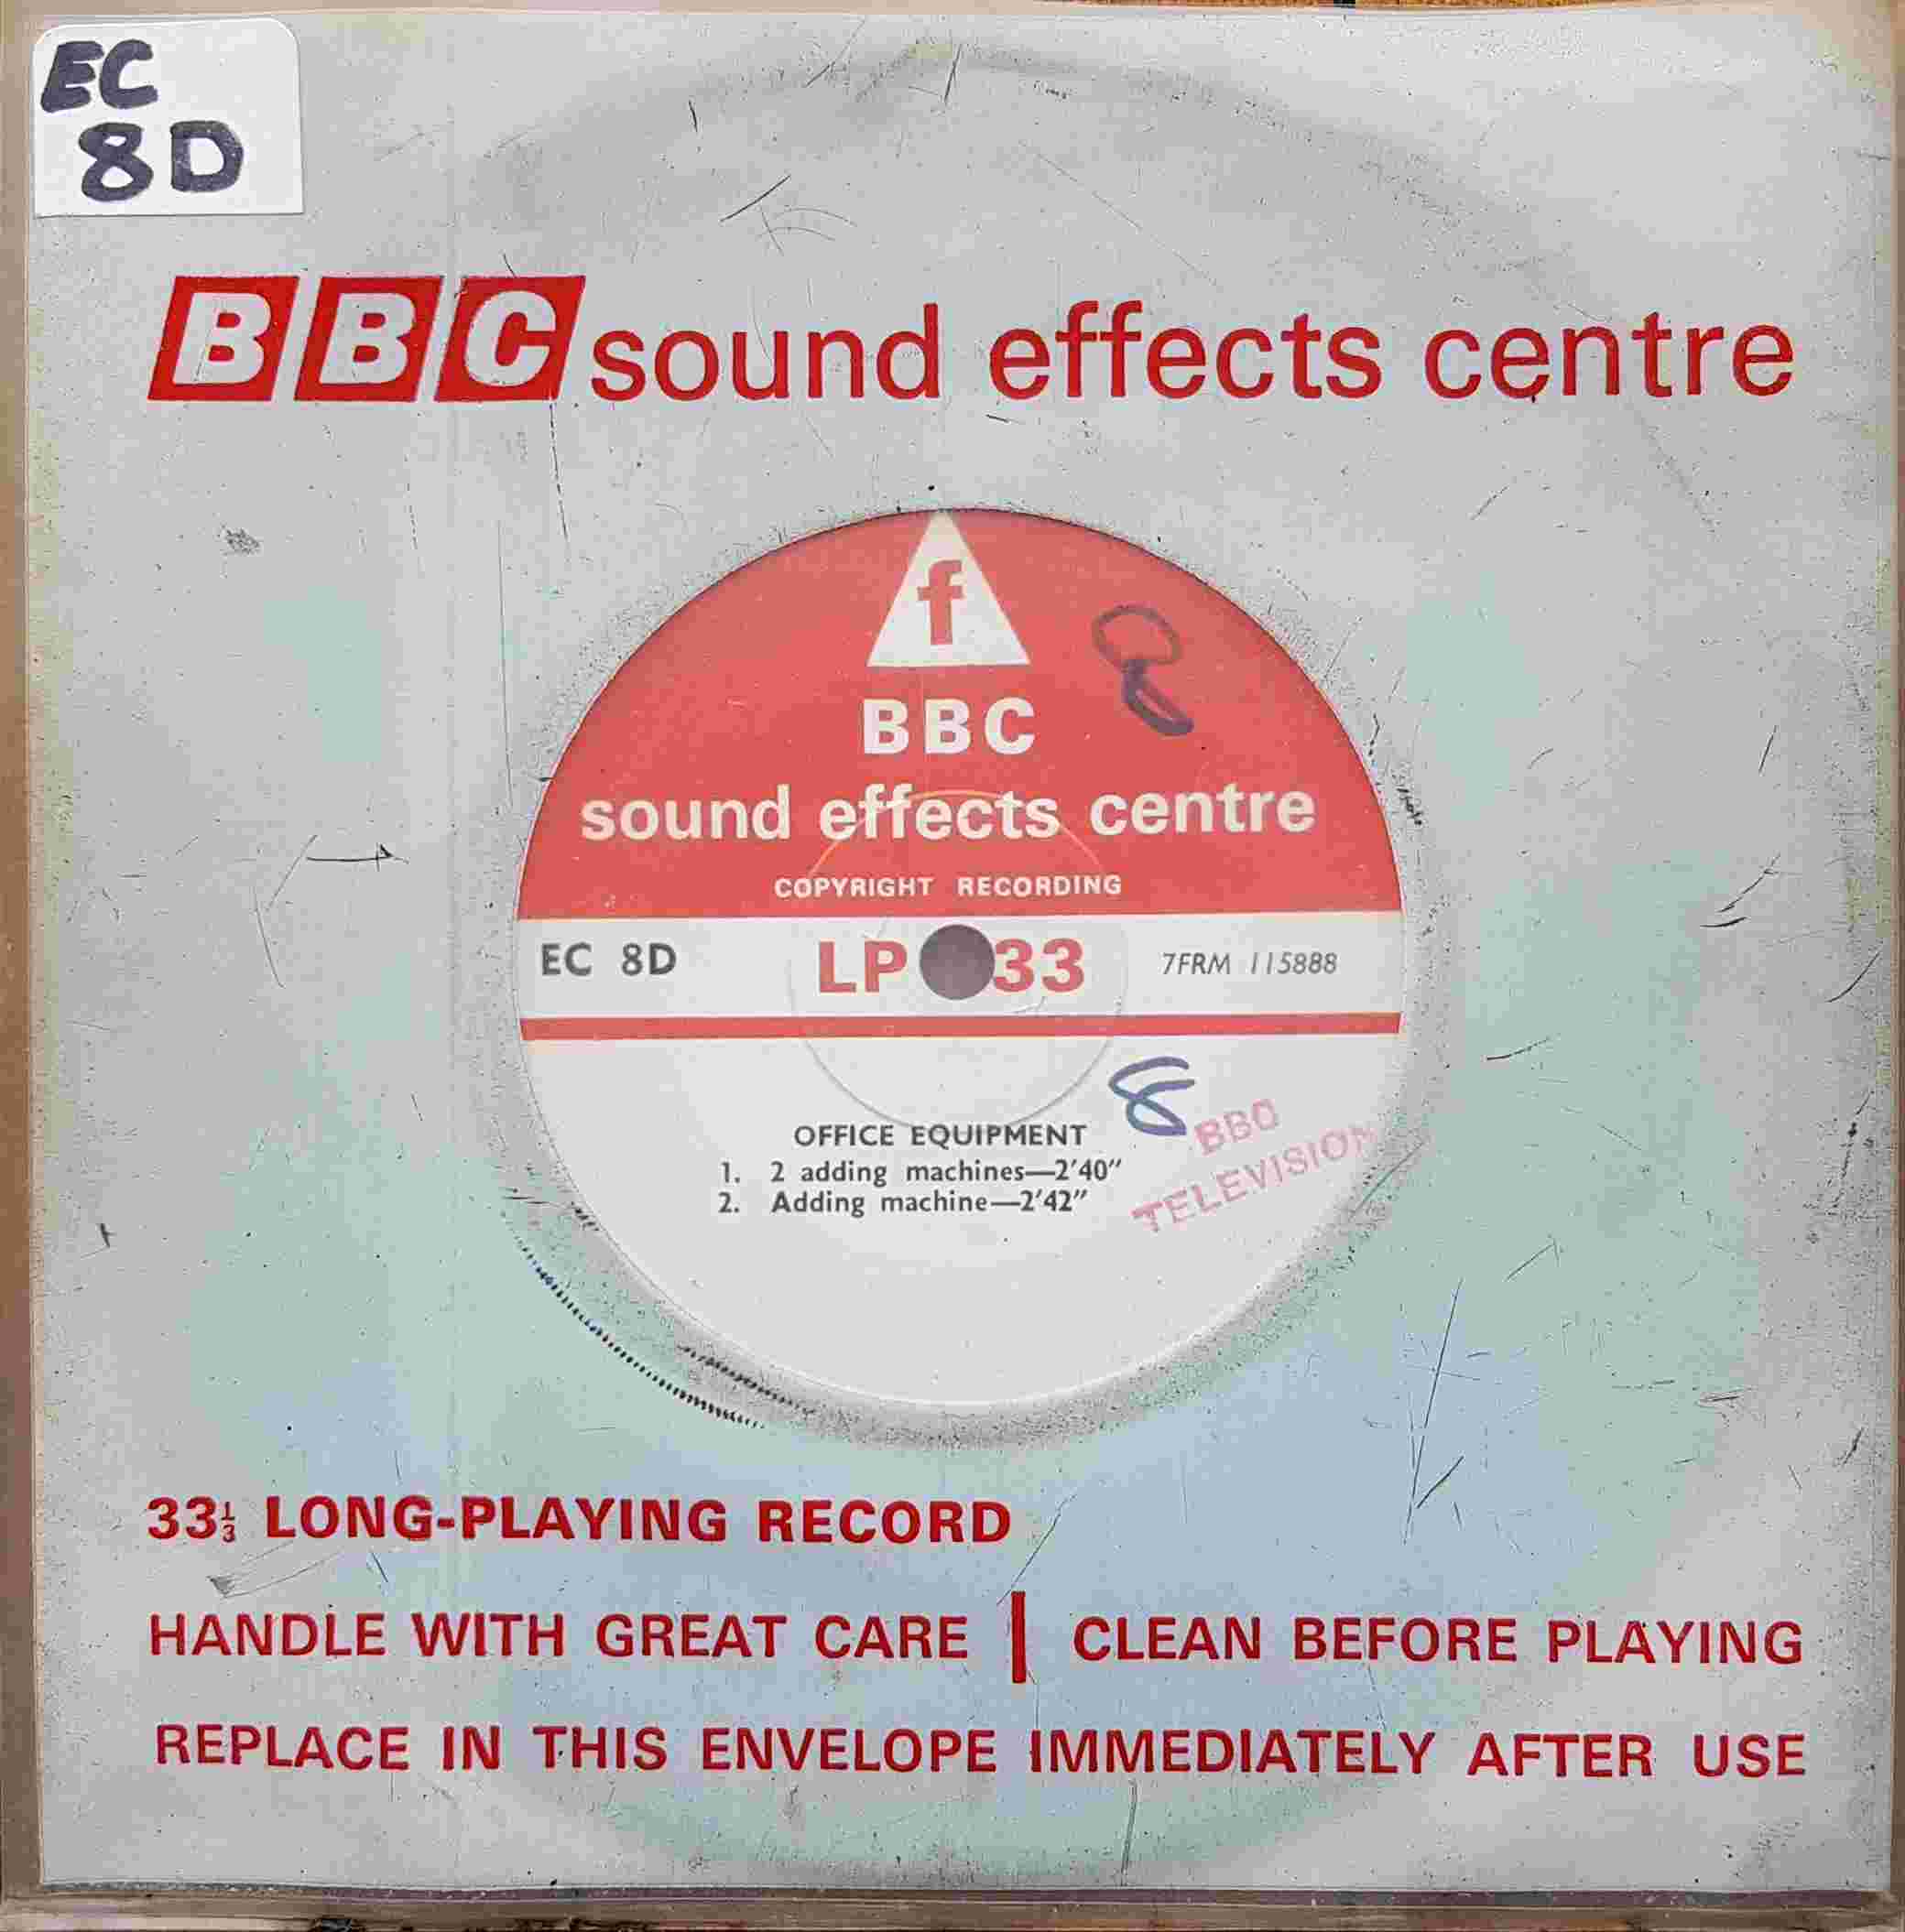 Picture of EC 8D Office equipment by artist Not registered from the BBC records and Tapes library